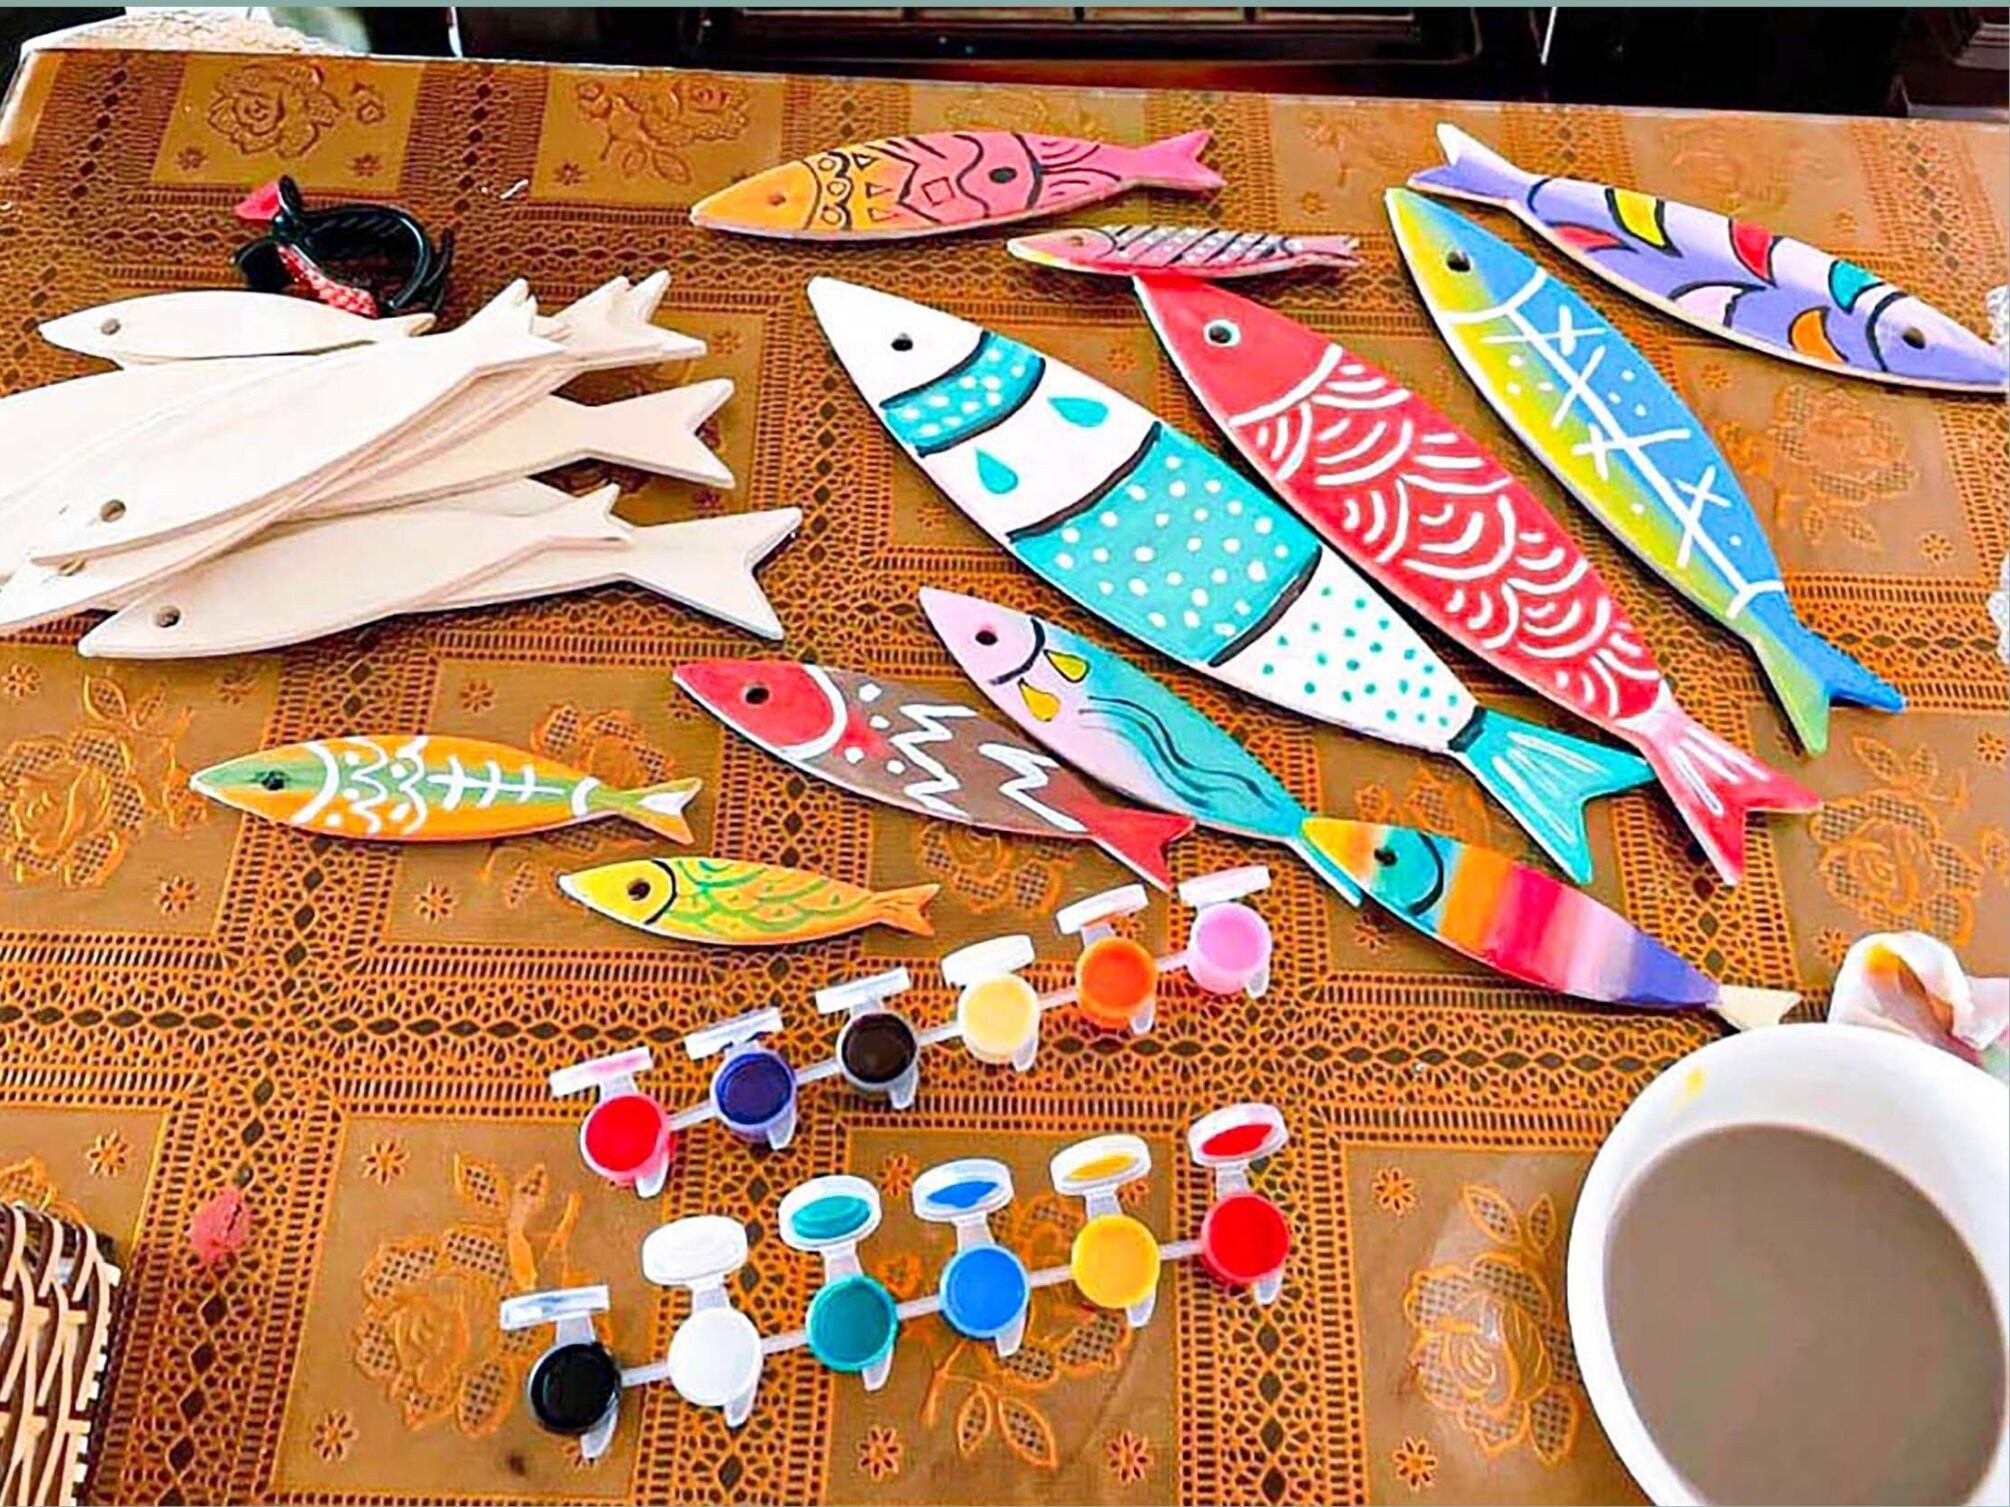 LEOGOR Multilayered Wood Crafts for Kids - Painting Activity with  Unfinished Fish Cutouts - DIY Wooden Things to Paint for Girls Ages 8-12  and Boys